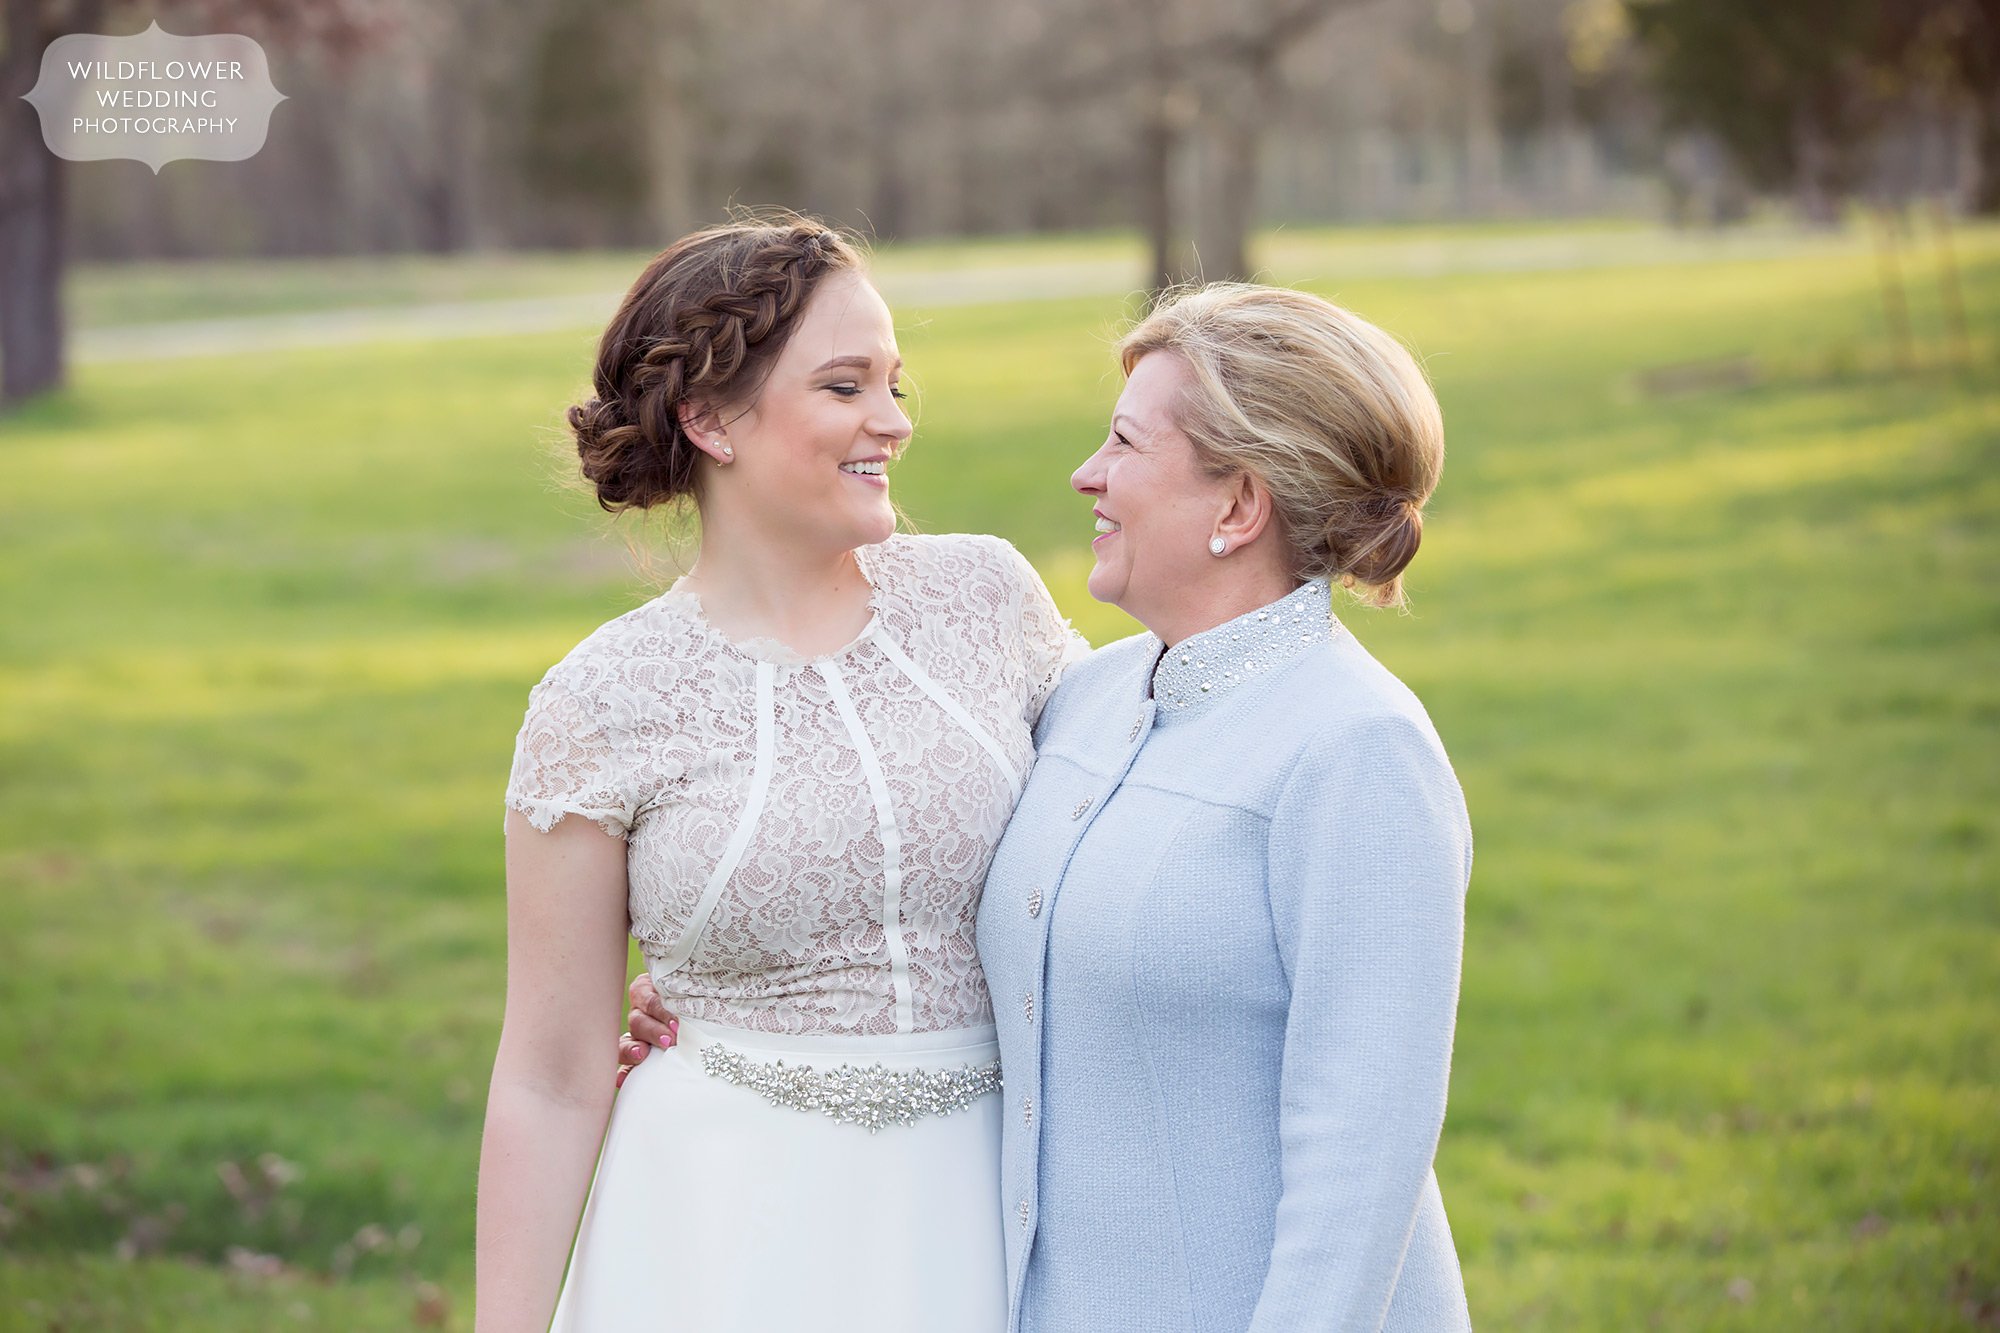 Sweet photo of the bride and her mother after a springtime elopement ceremony.